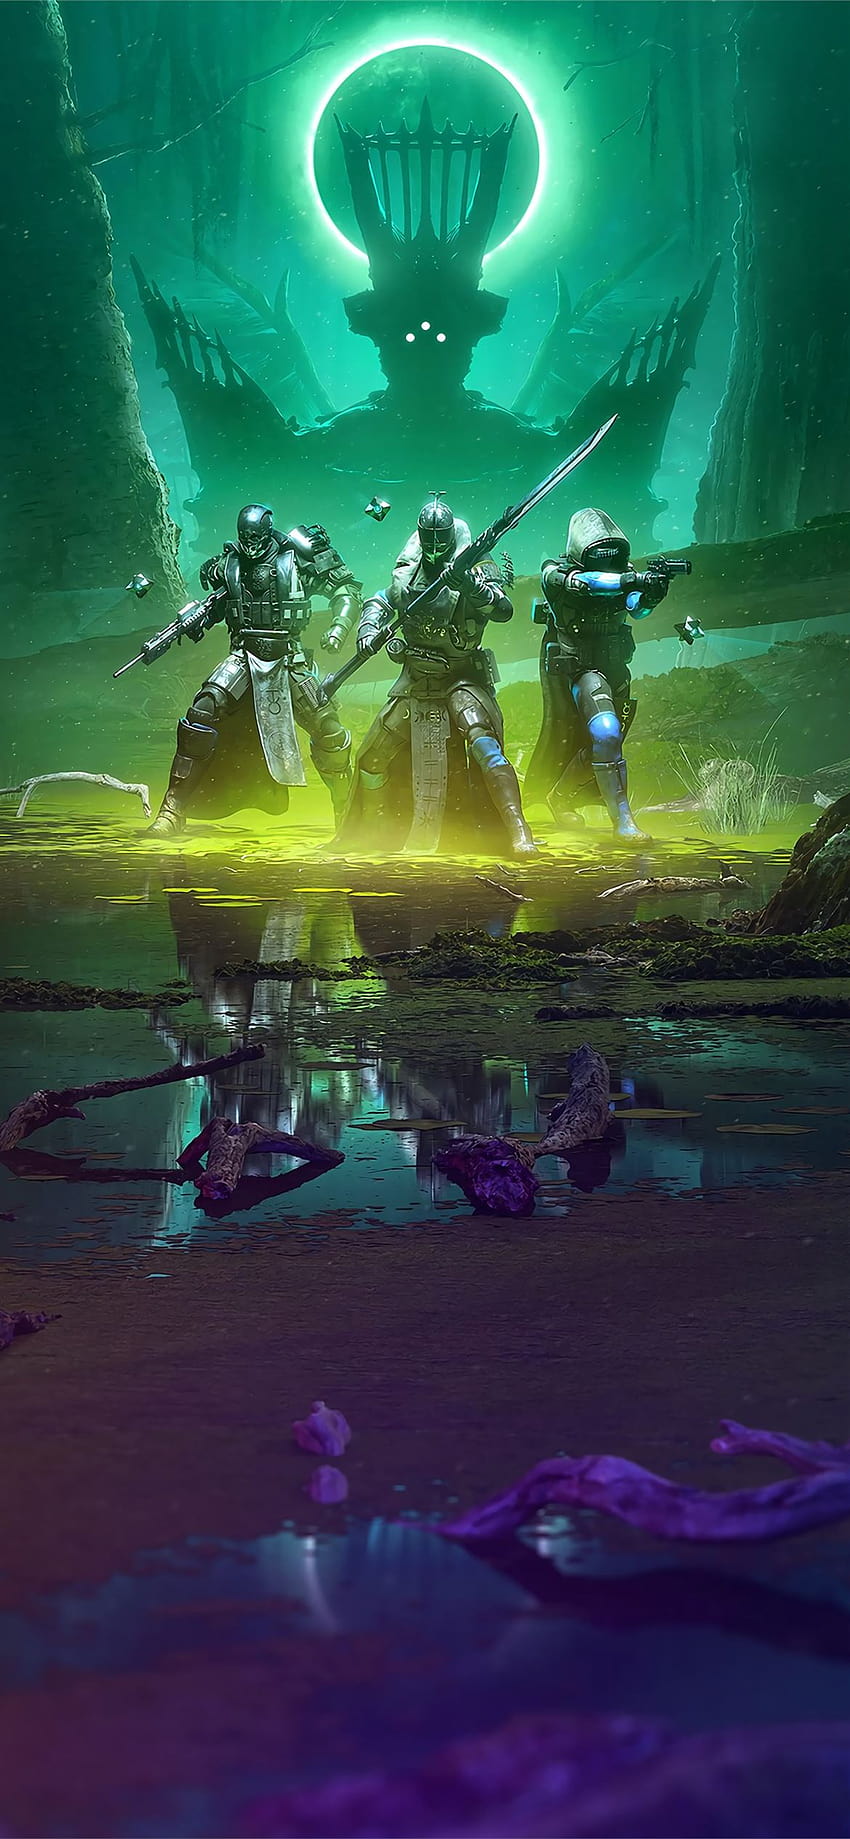 destiny 2 the witch queen 2021 iPhone 12, destiny 2 iphone HD phone wallpaper